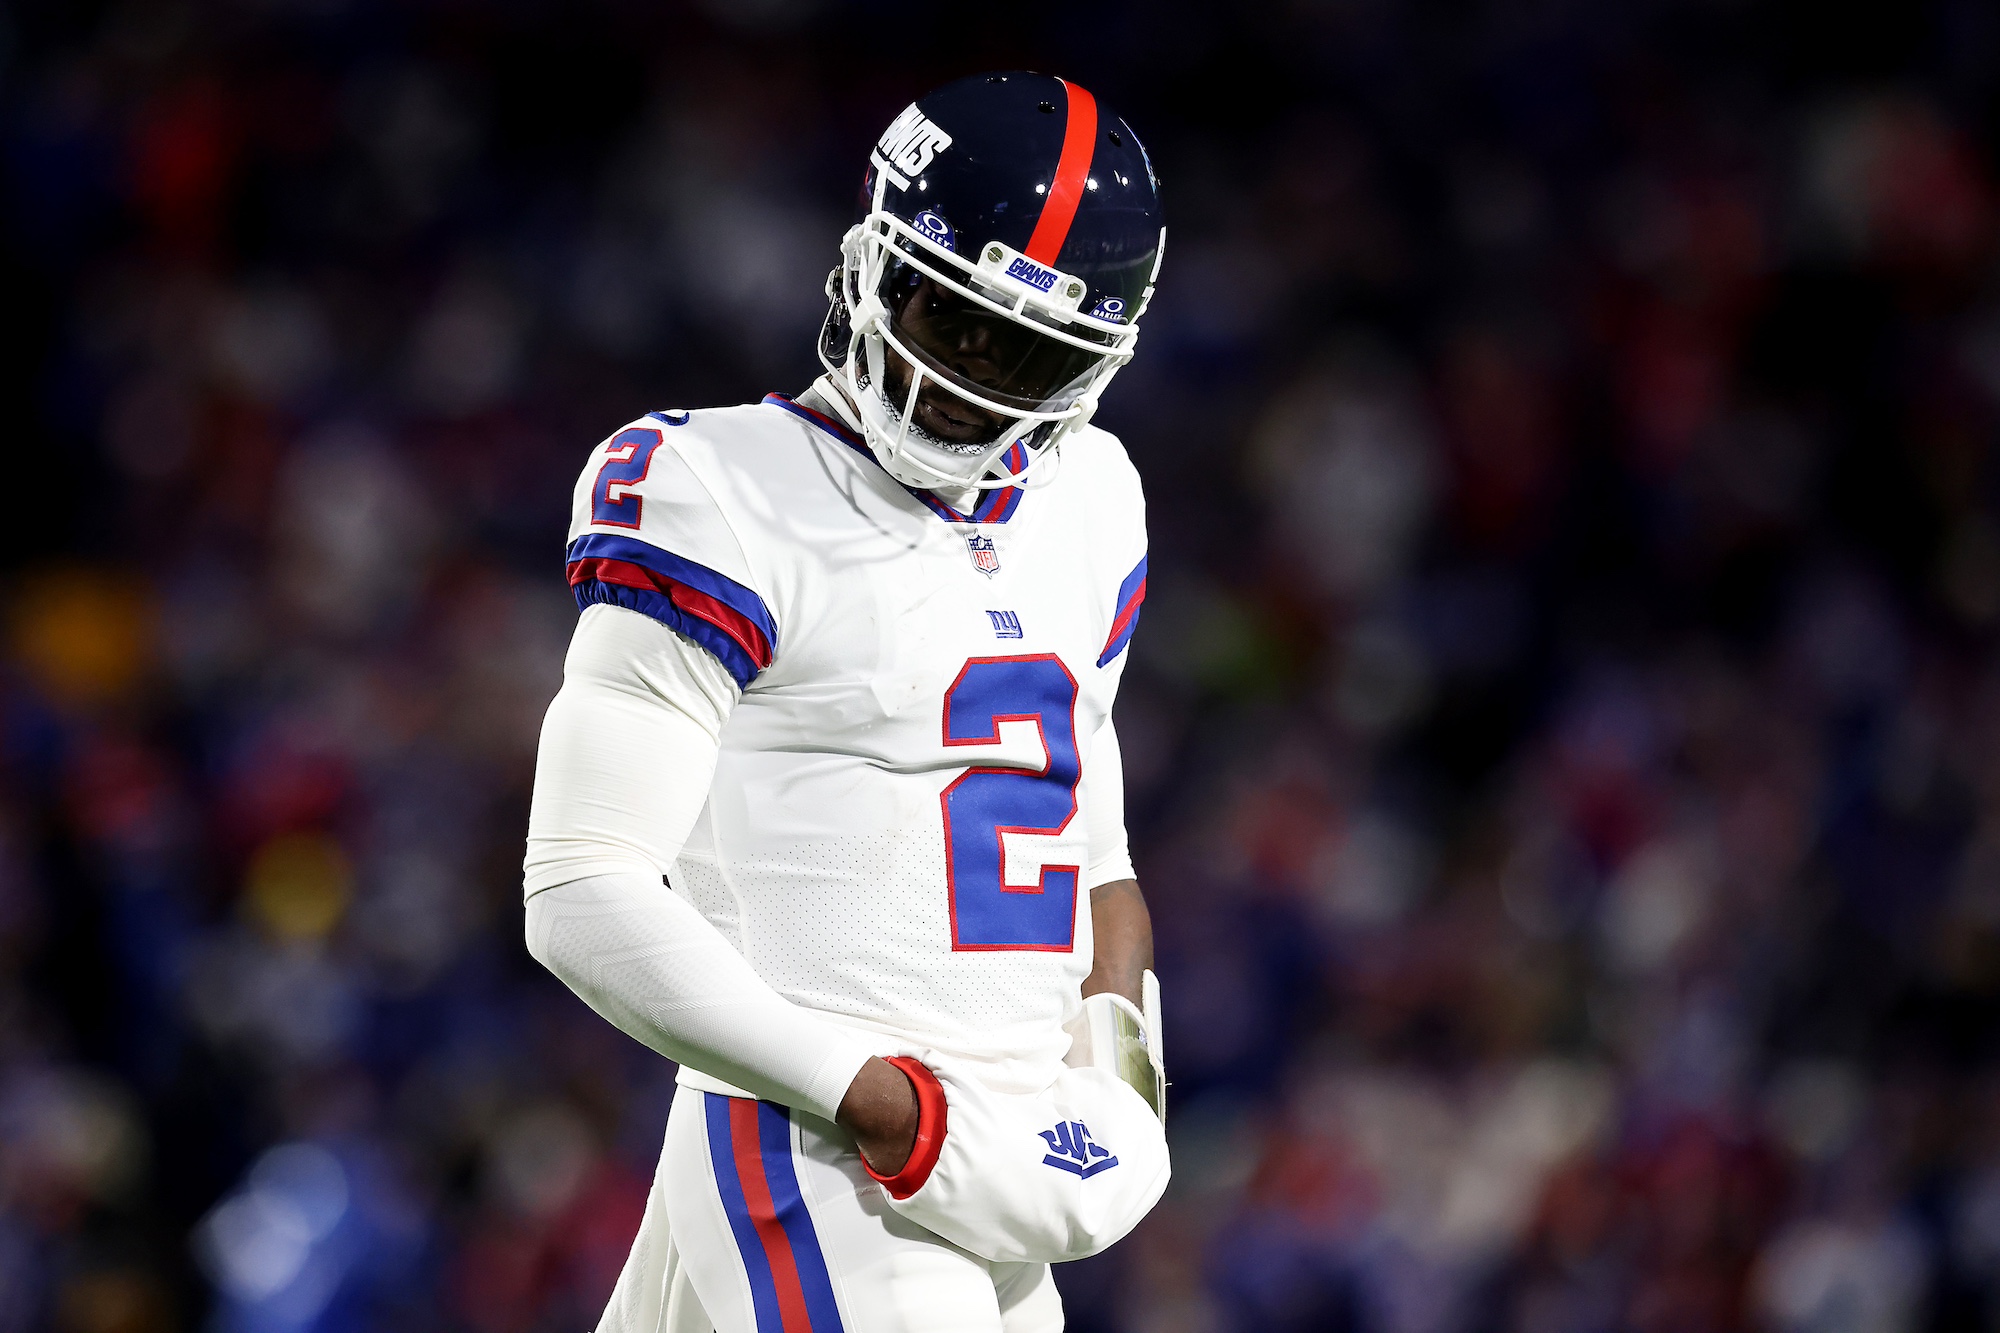 ORCHARD PARK, NEW YORK - OCTOBER 15: Tyrod Taylor #2 of the New York Giants looks on in the second quarter of a game against the Buffalo Bills at Highmark Stadium on October 15, 2023 in Orchard Park, New York. (Photo by Bryan M. Bennett/Getty Images)